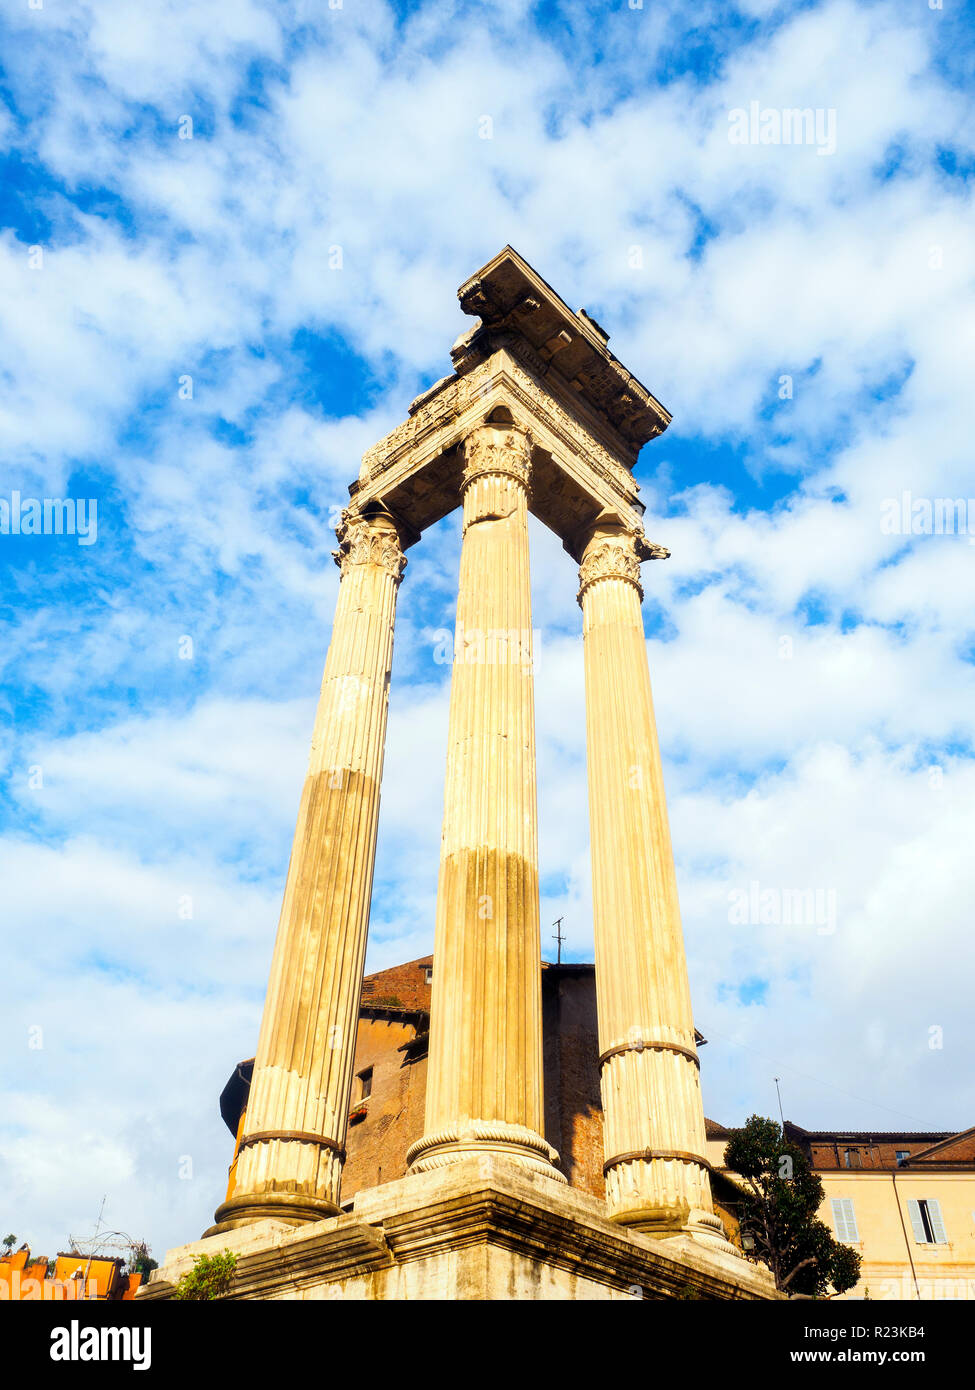 The Temple of Apollo Sosianus (previously known as the Apollinar and the temple of Apollo Medicus) is a Roman temple dedicated to Apollo in the Campus Martius, next to the Theatre of Marcellus and the Porticus Octaviae, in Rome, Italy. Stock Photo